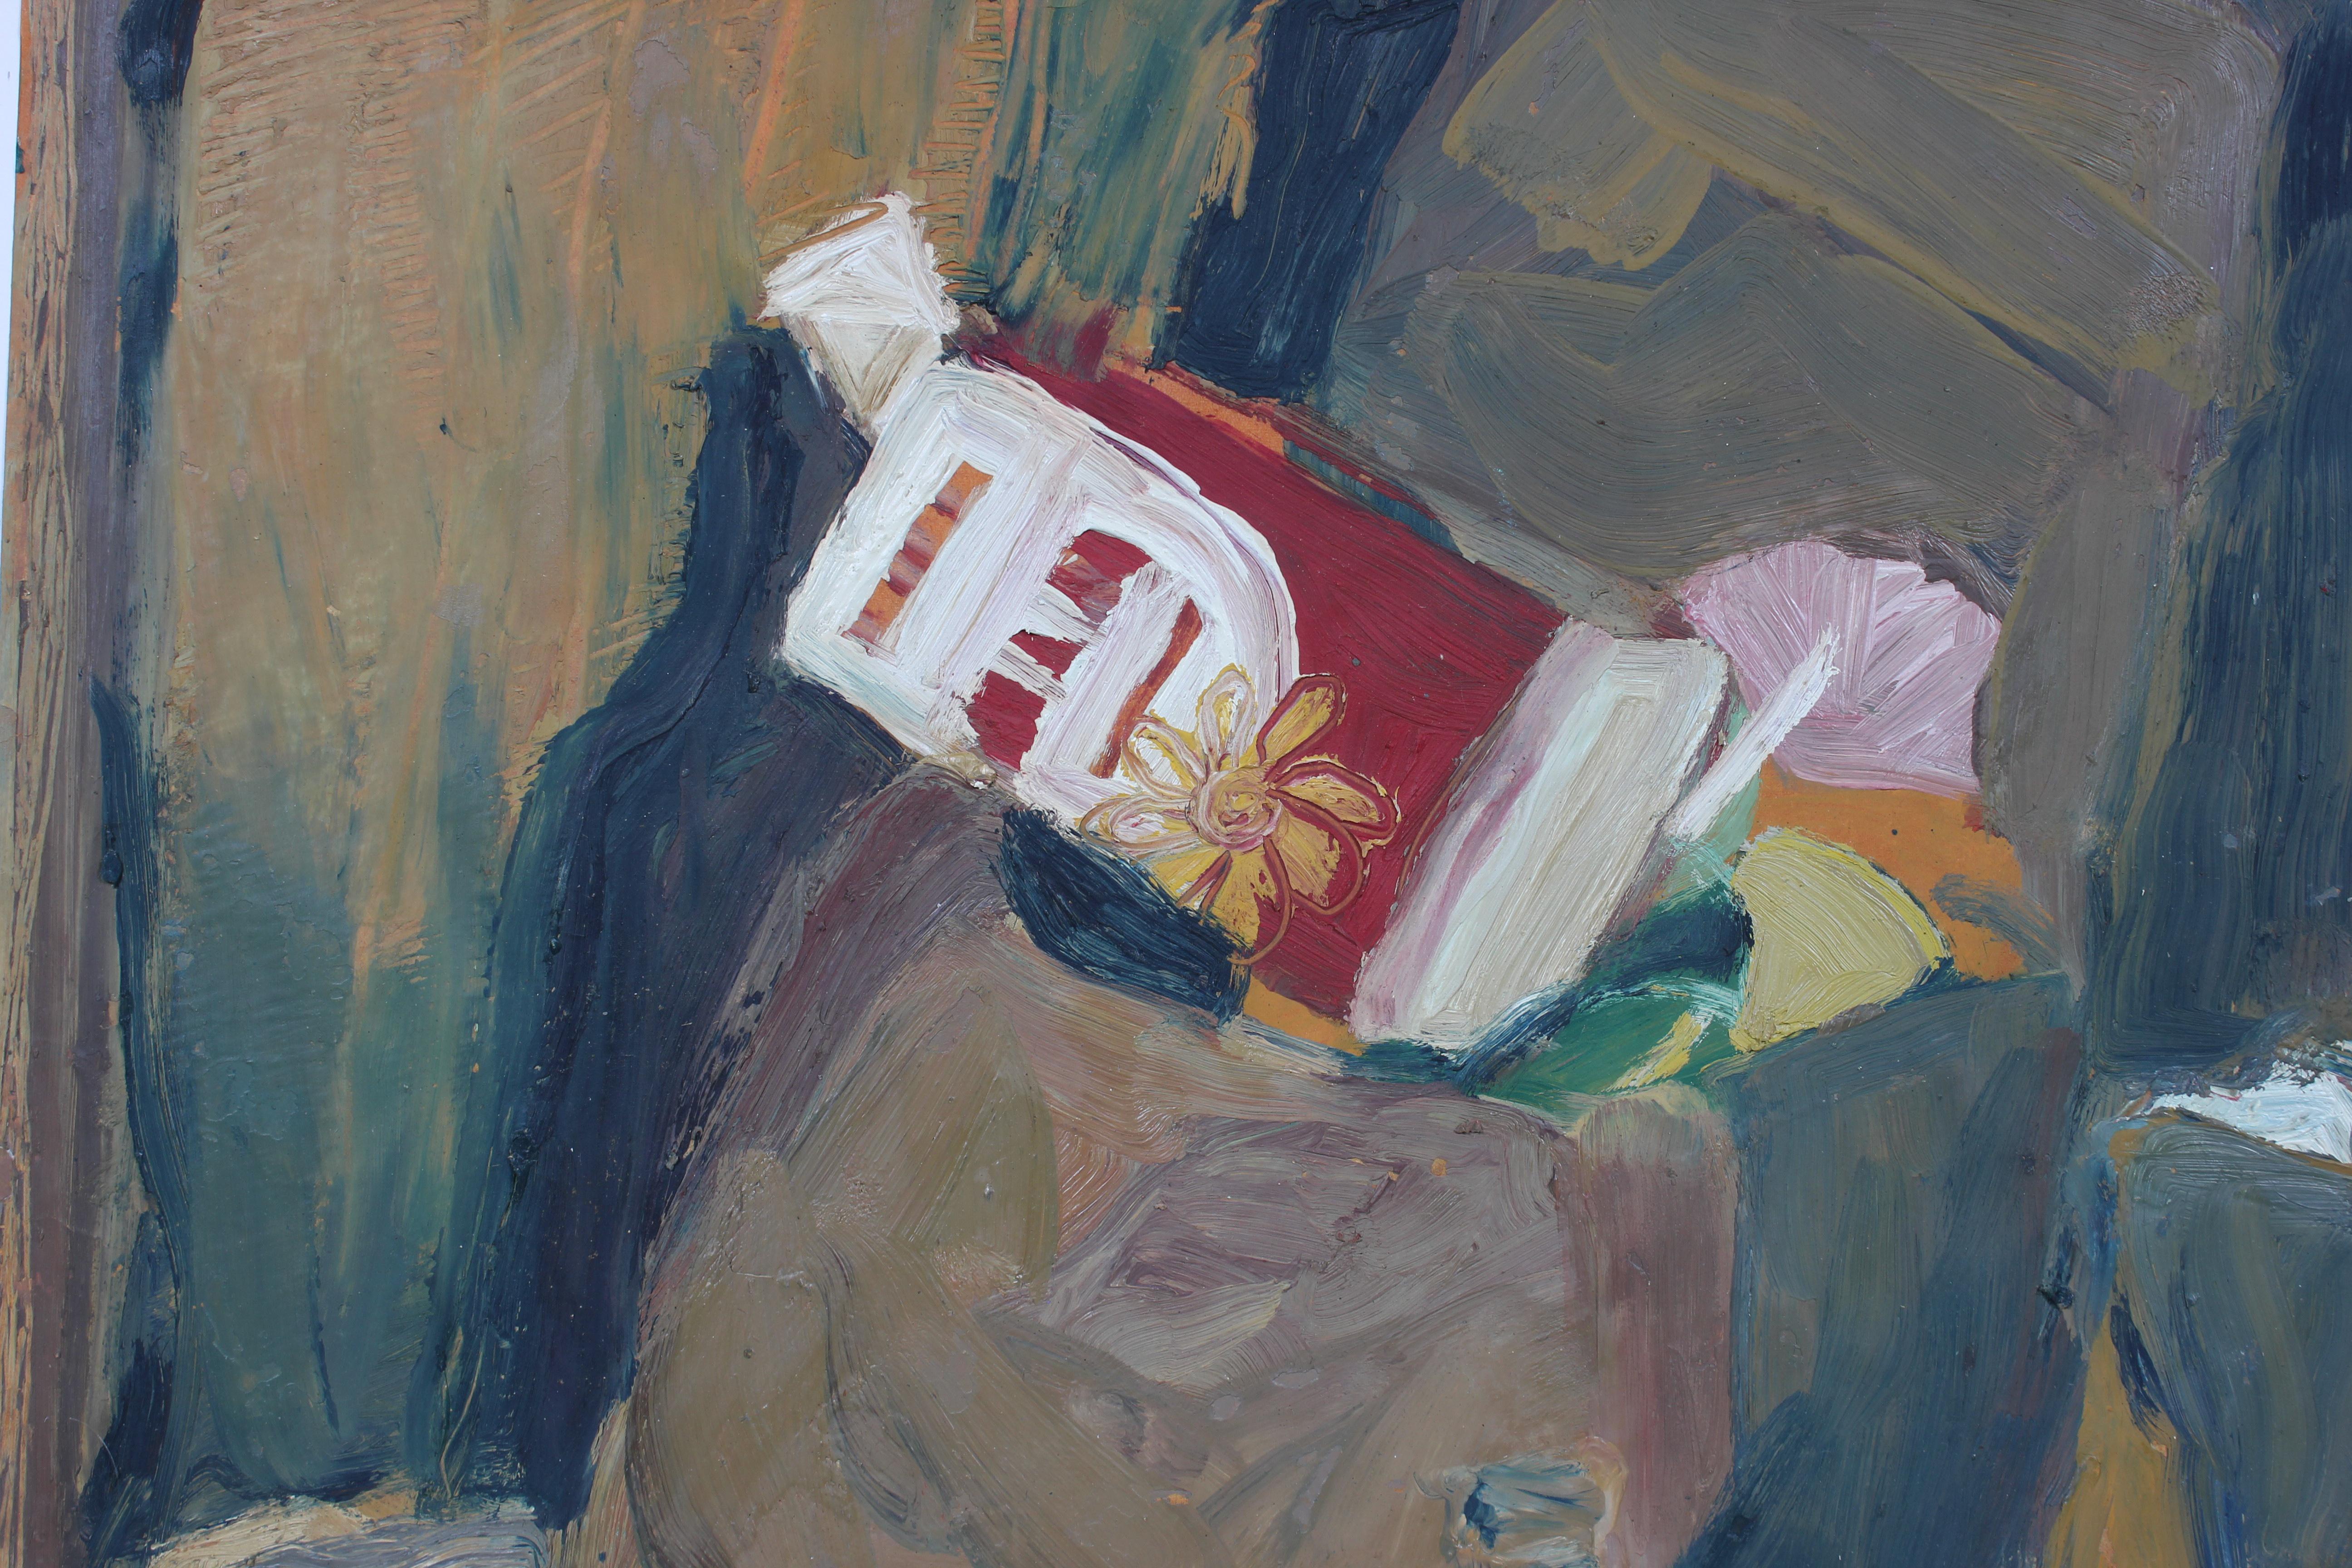 Muted Still Life in Oil Paint with Grocery Bags and Bottles, Circa 1960s - Painting by Jane Rades